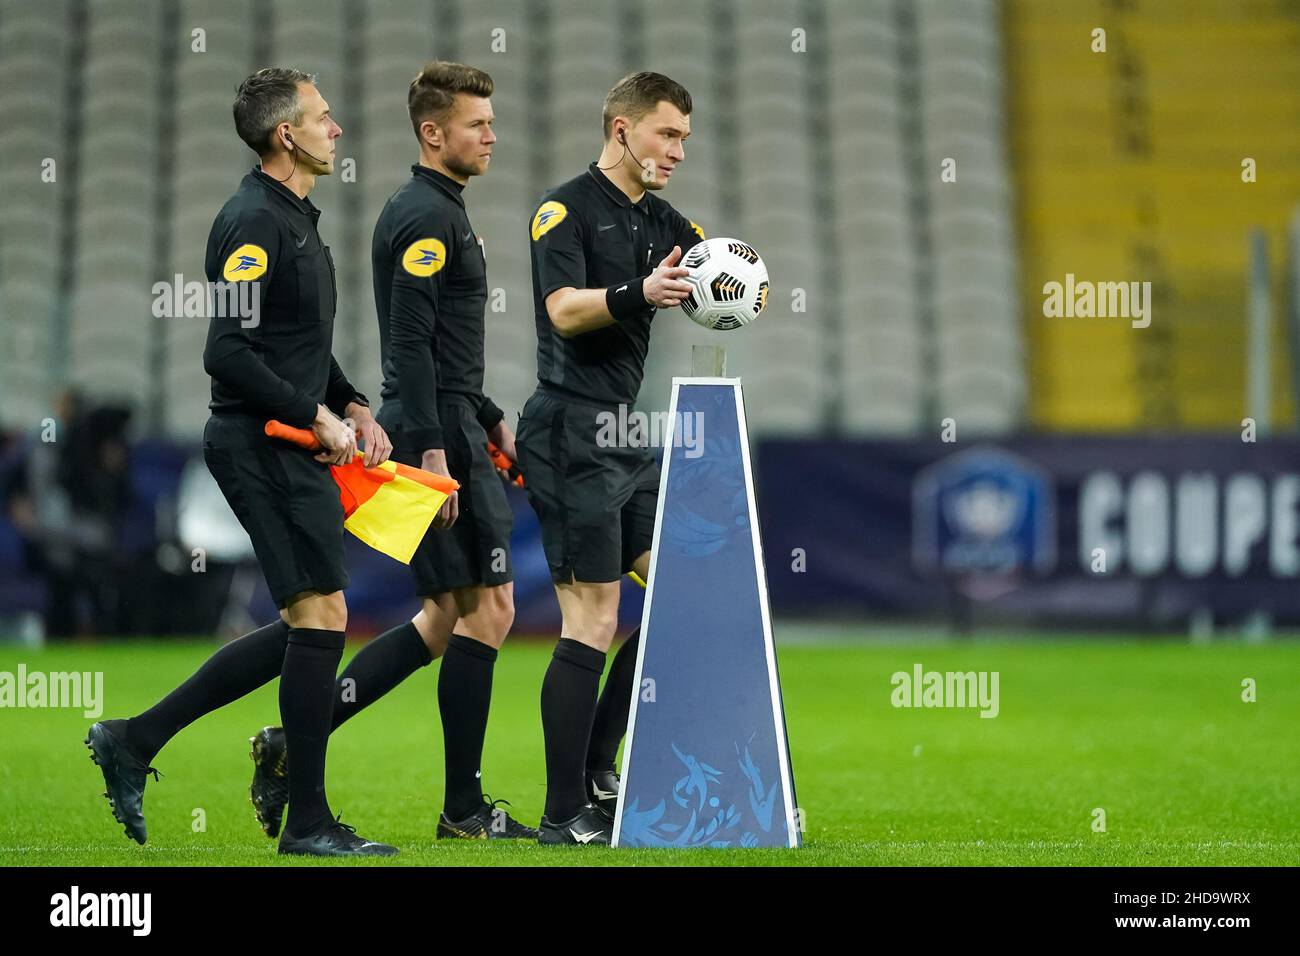 LENS, FRANCE - JANUARY 4: referee Willy Delajod during the French Cup match between Racing Club de Lens and LOSC Lille at Stade Bollaert-Delelis on January 4, 2022 in Lens, France (Photo by Jeroen Meuwsen/Orange Pictures) Stock Photo